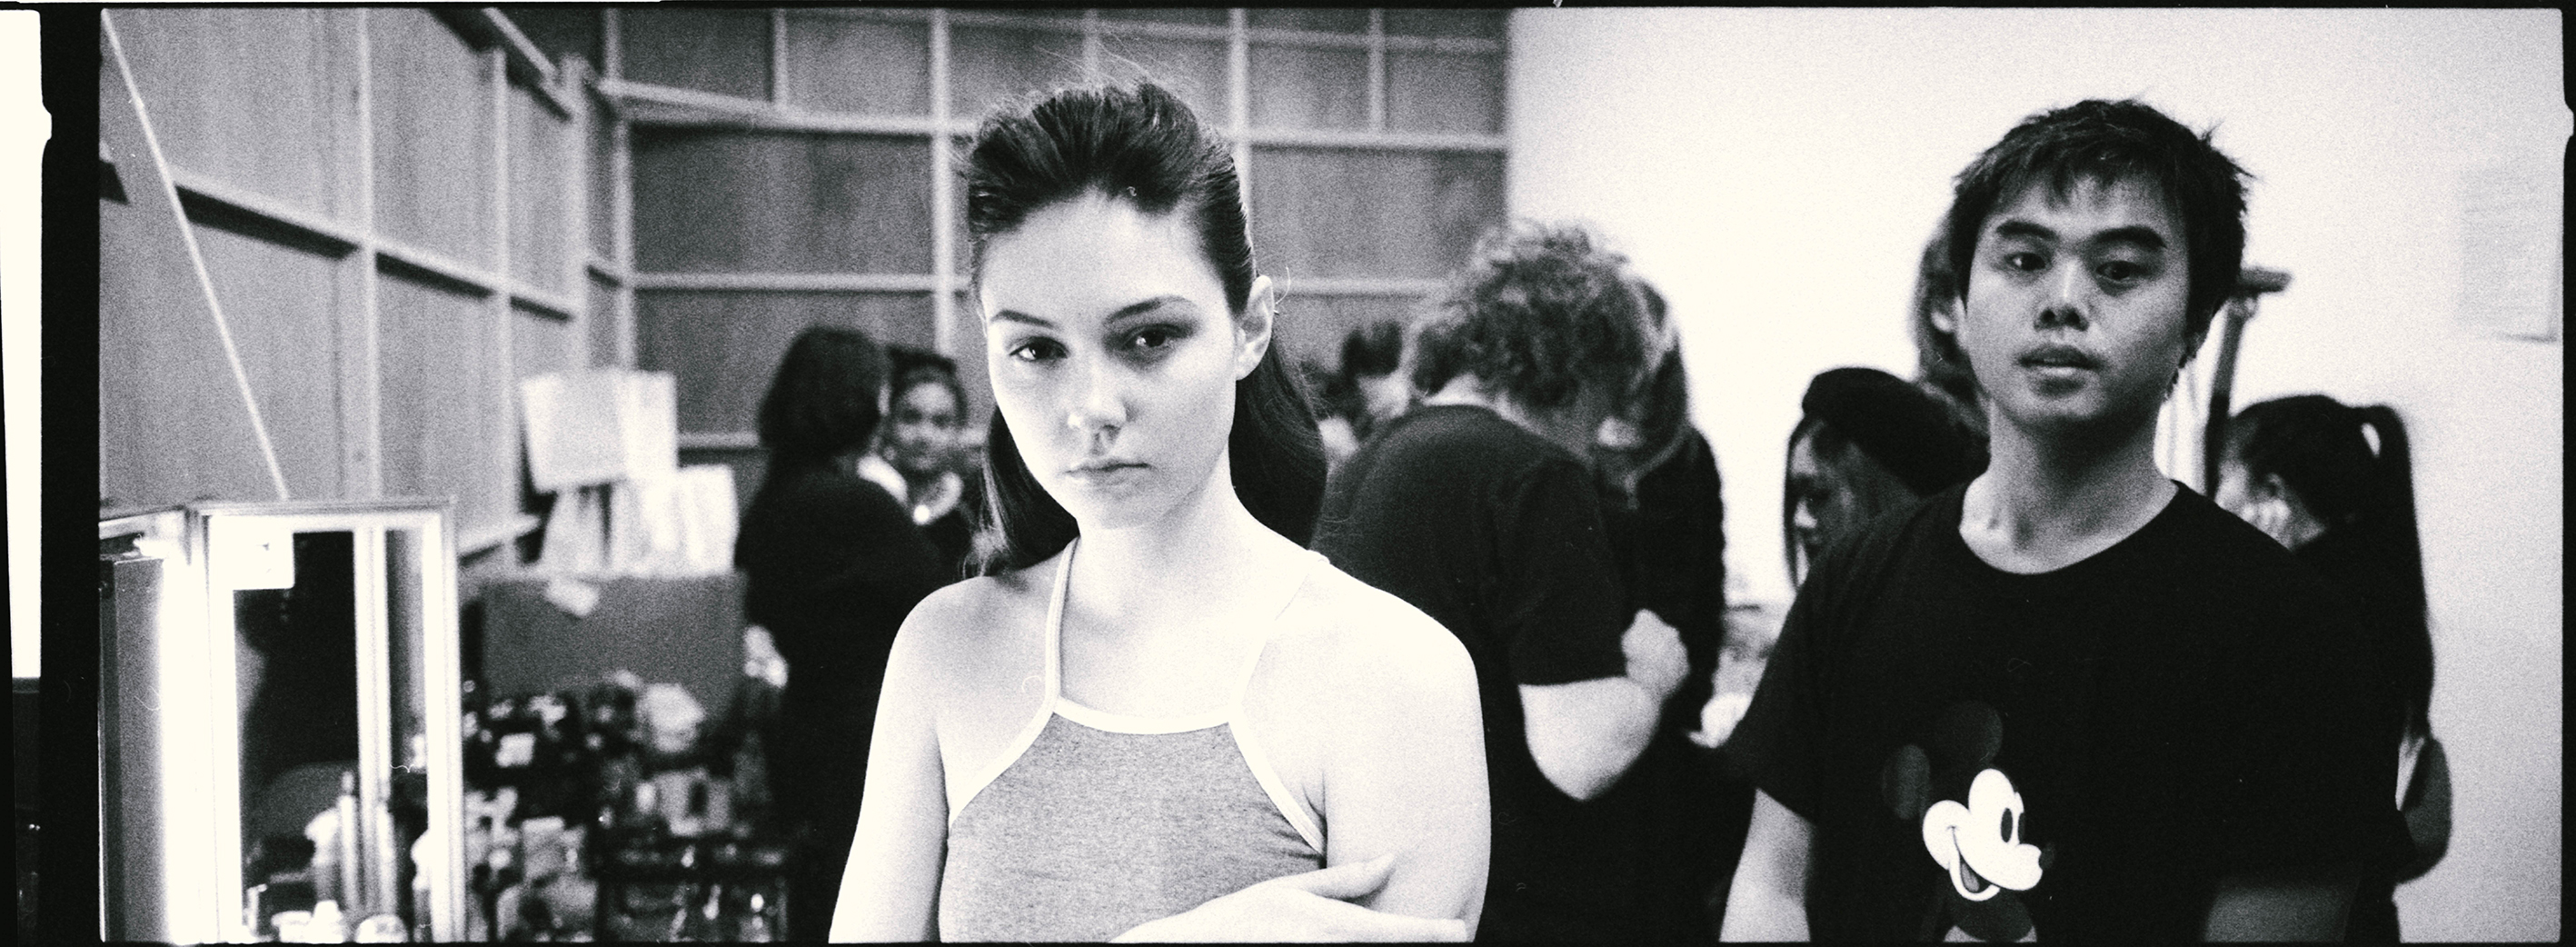 Backstage image from London Fashion week shot by Simon King on black and white ilford DELTA 3200 film